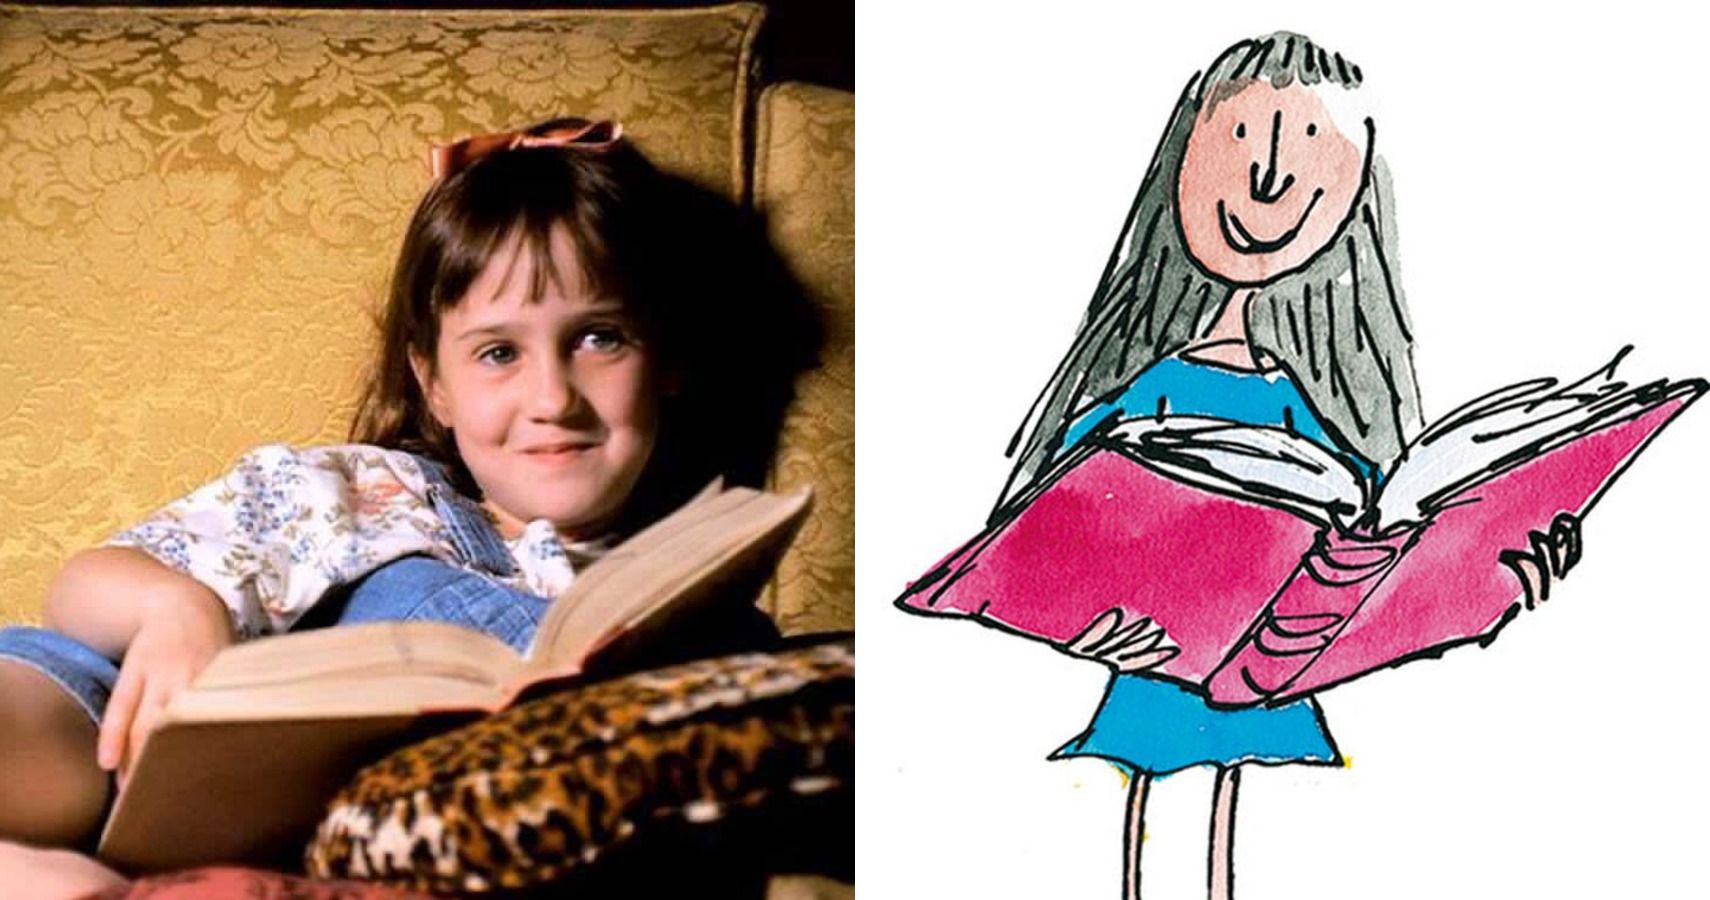 A split-image showing Mara Wilson's Matilda from the 1996 filmand her illustration from the book, drawn by Quentin Blake